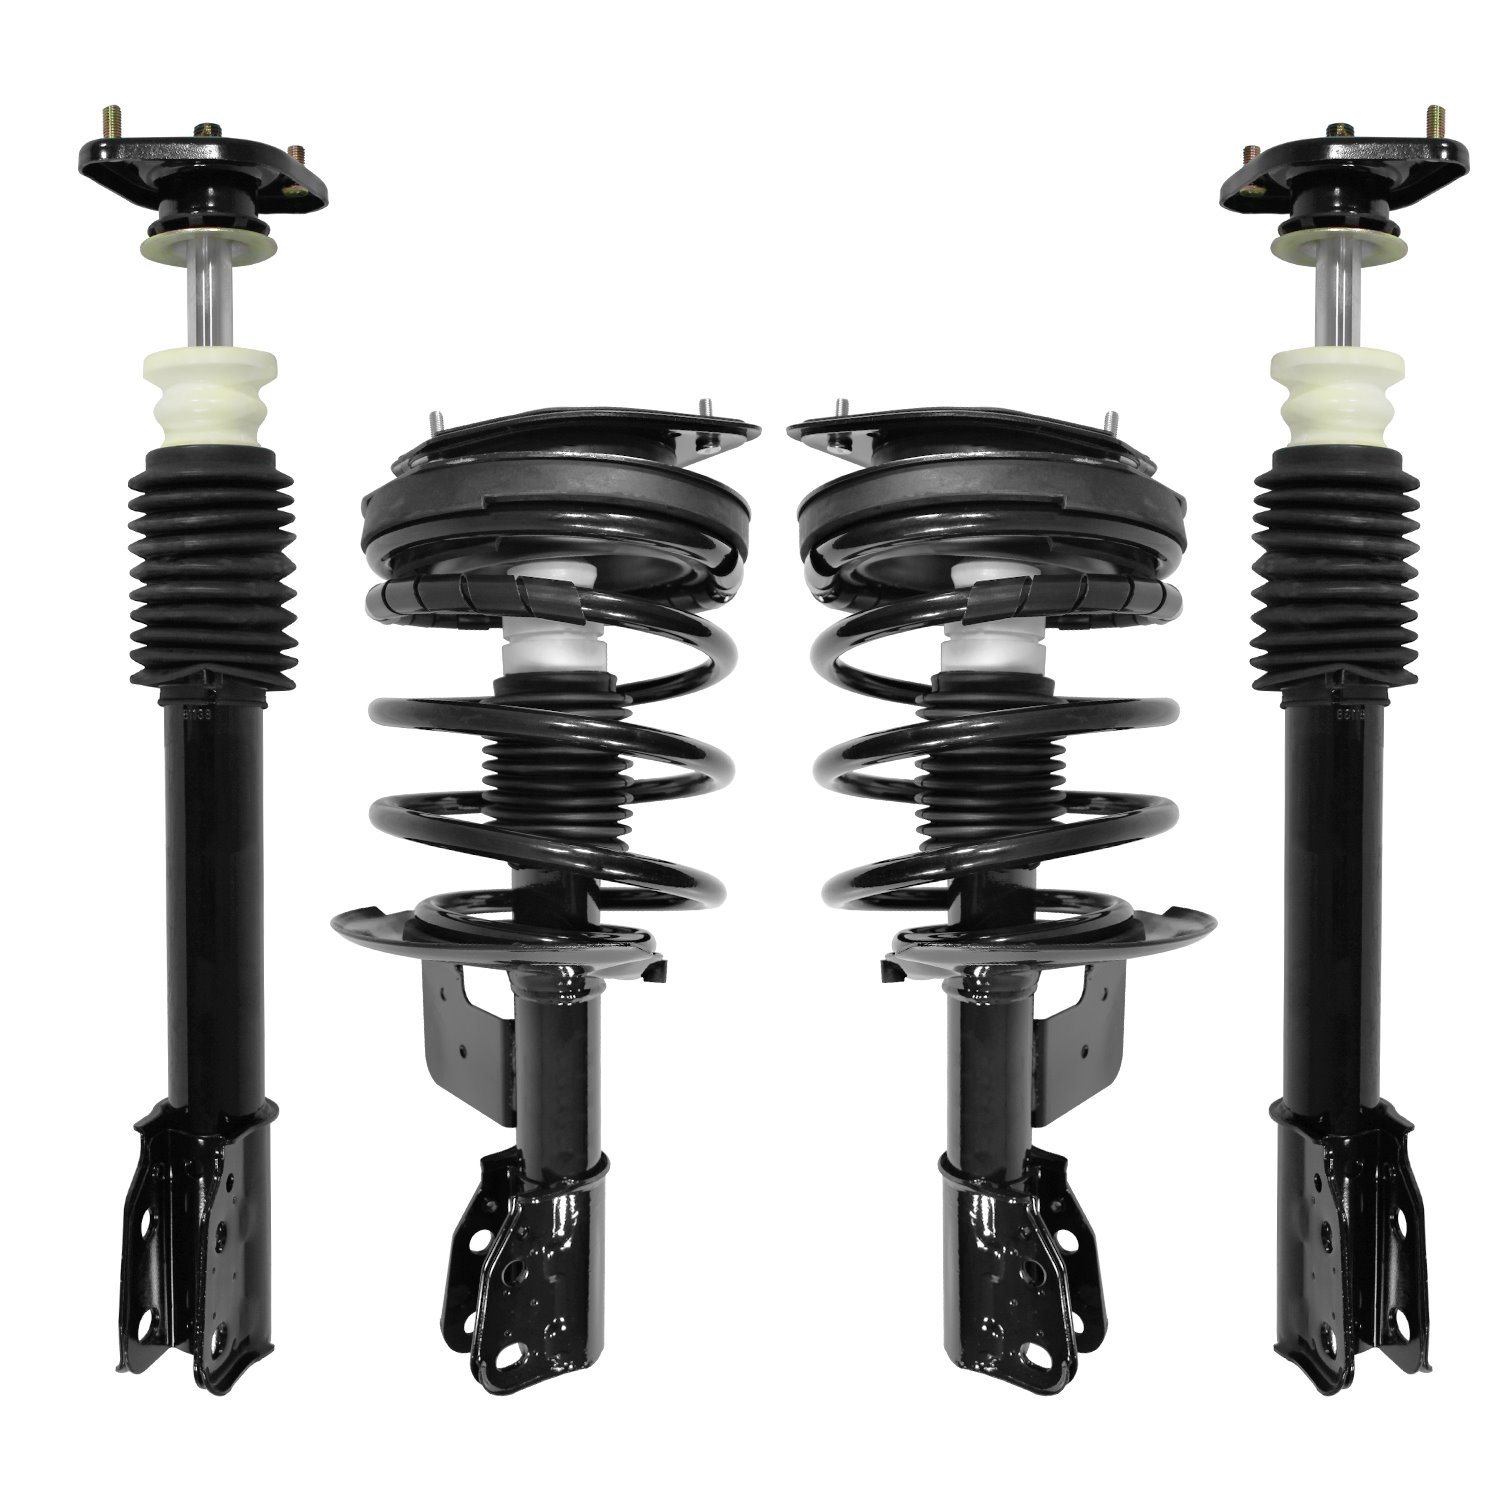 4-11420-15390-001 Front & Rear Suspension Strut & Coil Spring Assembly Kit Fits Select GM